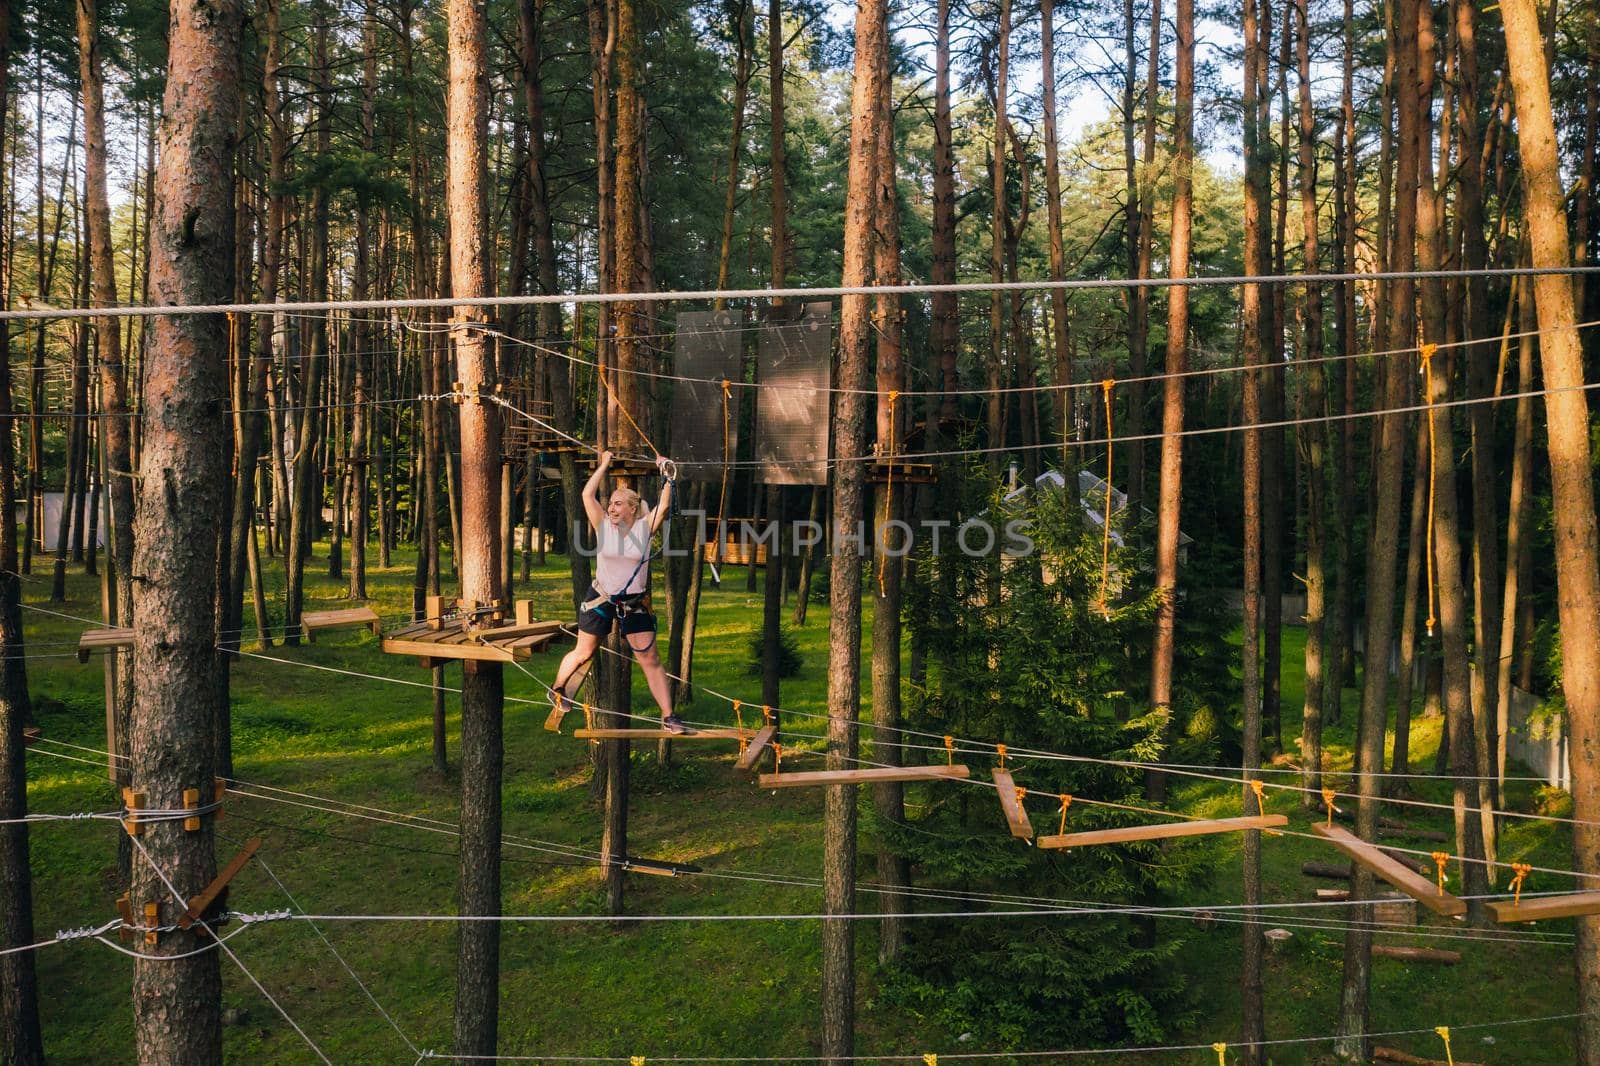 A woman overcomes an obstacle in a rope town. A woman in a forest rope park.